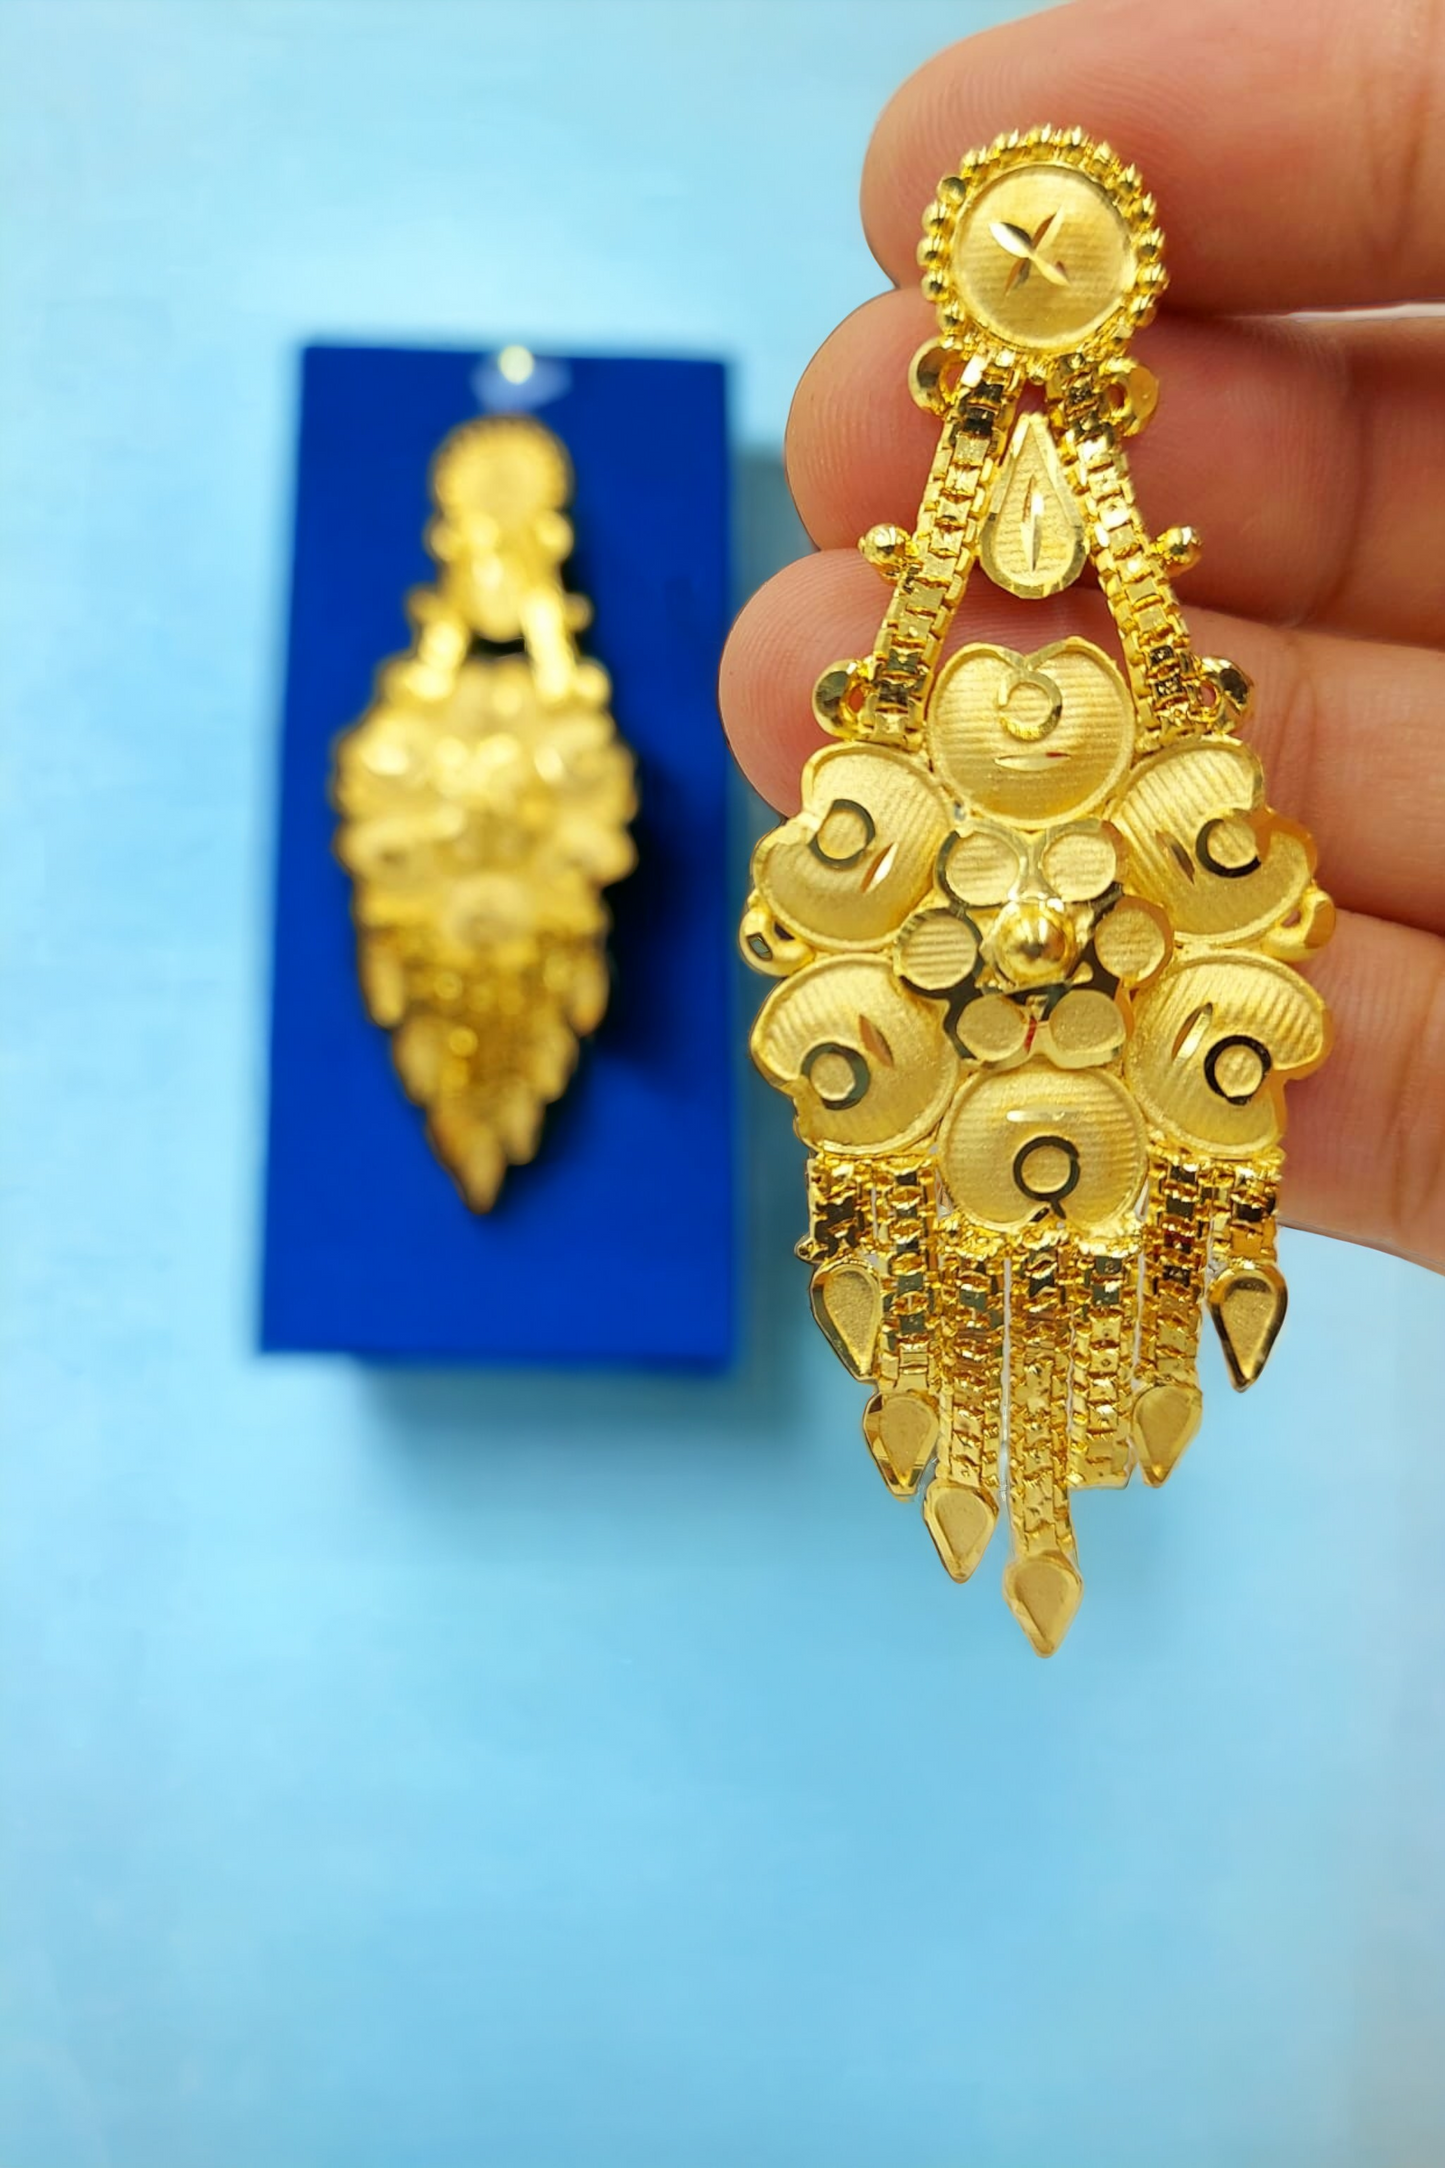 "Handmade Gold-Plated Earrings with Stunning Crystal"